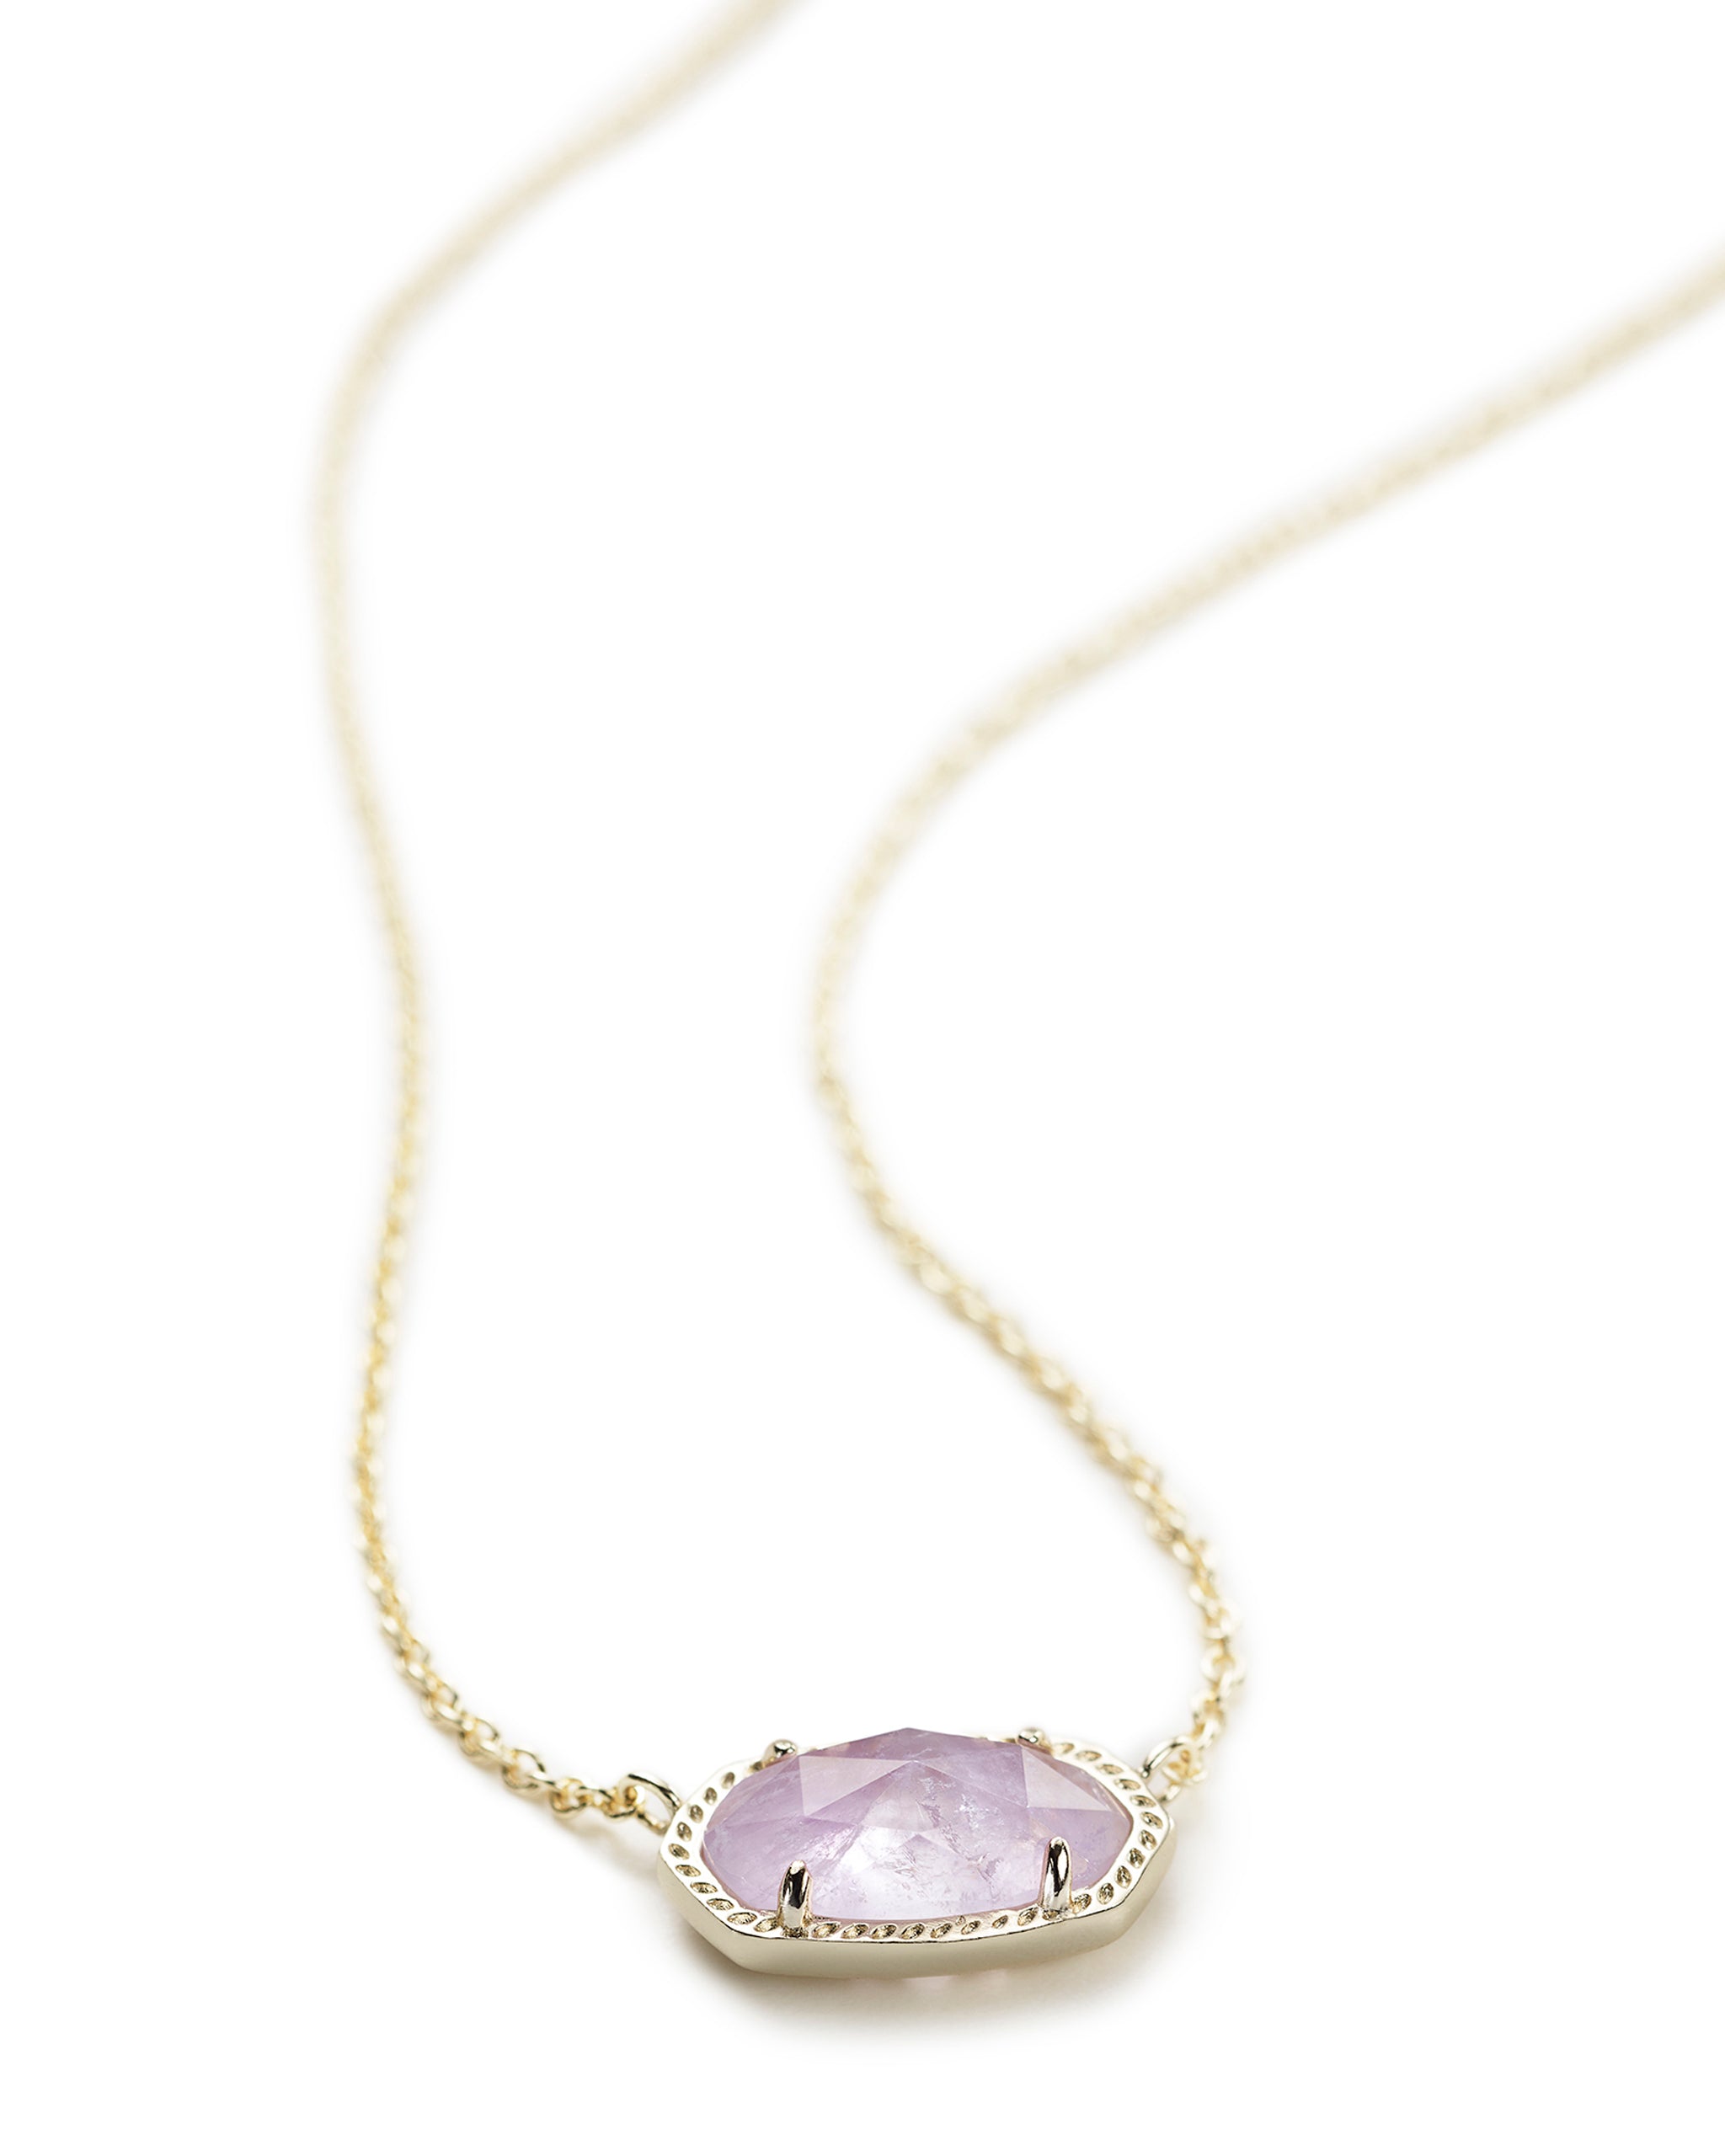 Kendra Scott Elisa Oval Pendant Necklace in Amethyst and Gold Plated